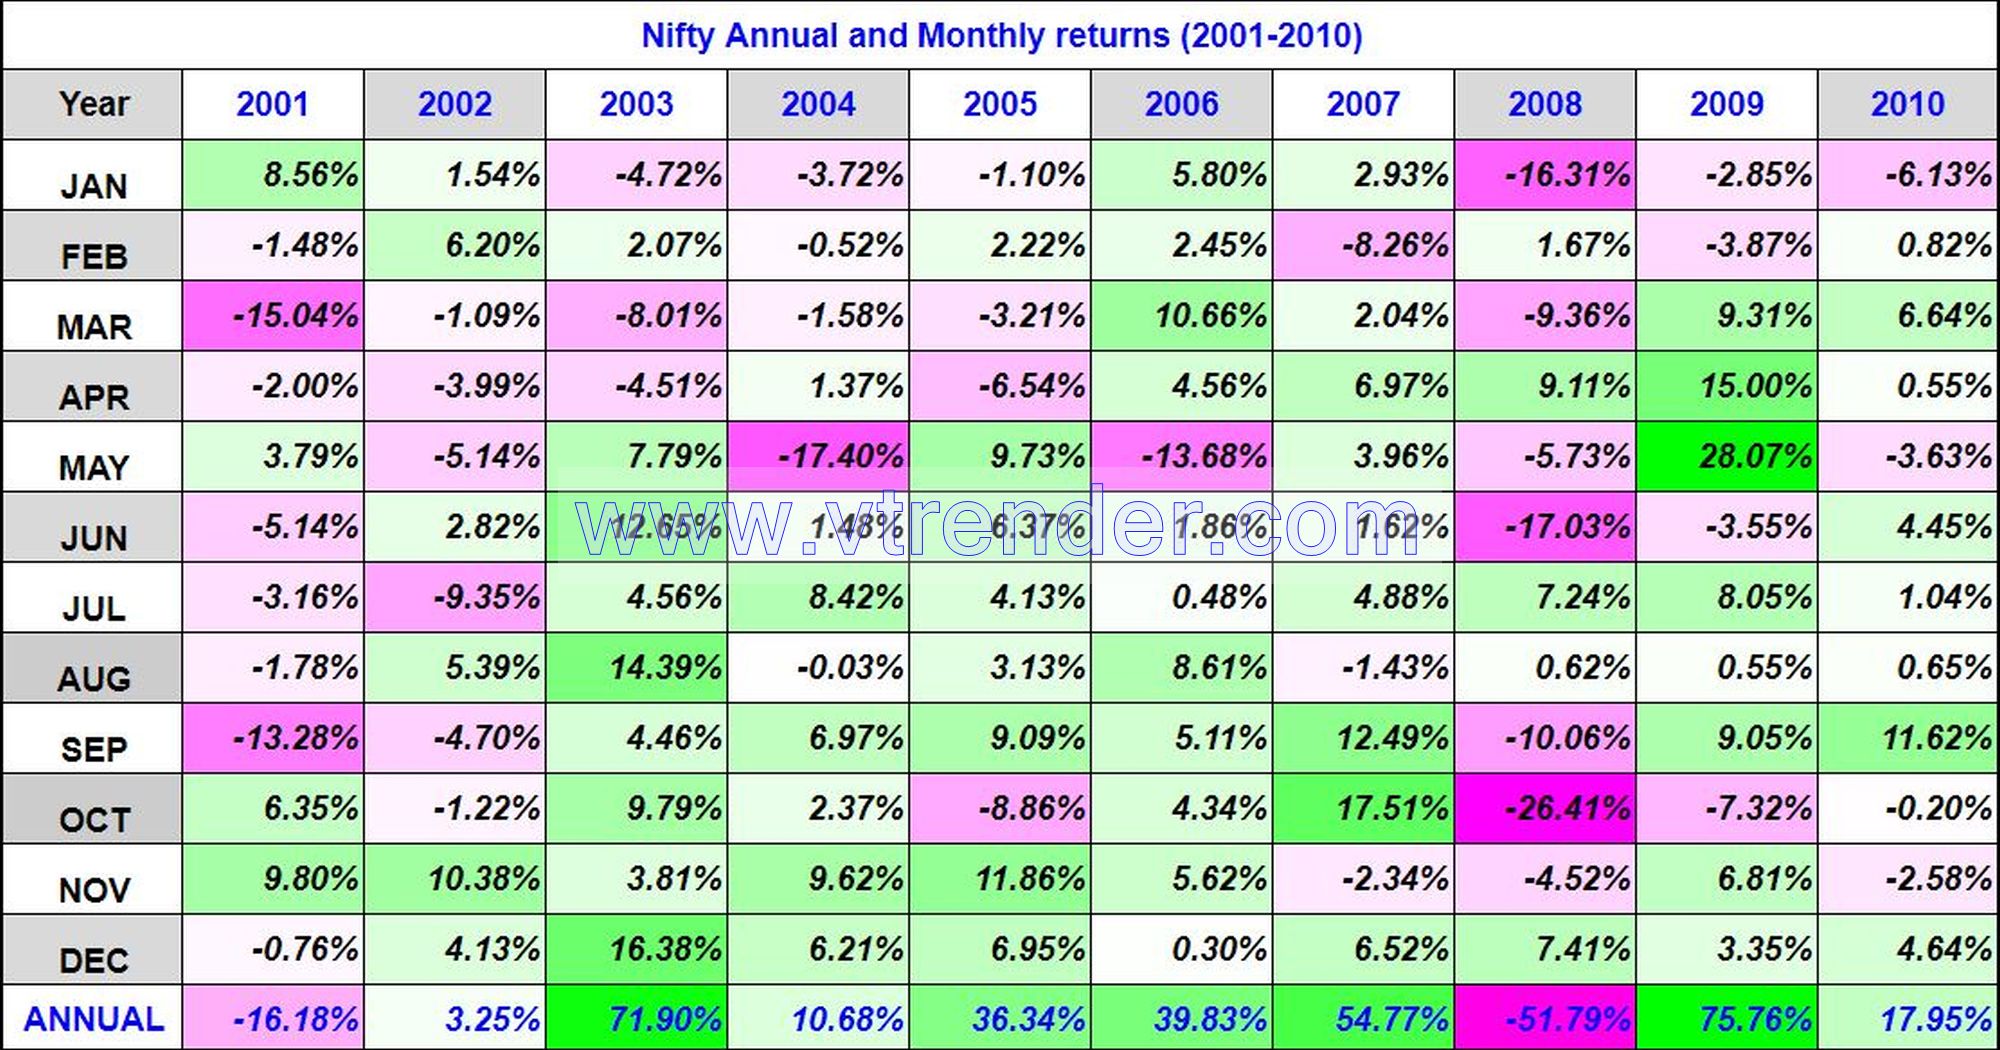 Niftyreturns2001 2010 Nifty 50 Monthly And Annual Returns (1991-2022) - 26Th Aug 2022 Annual, Monthly, Nifty Returns